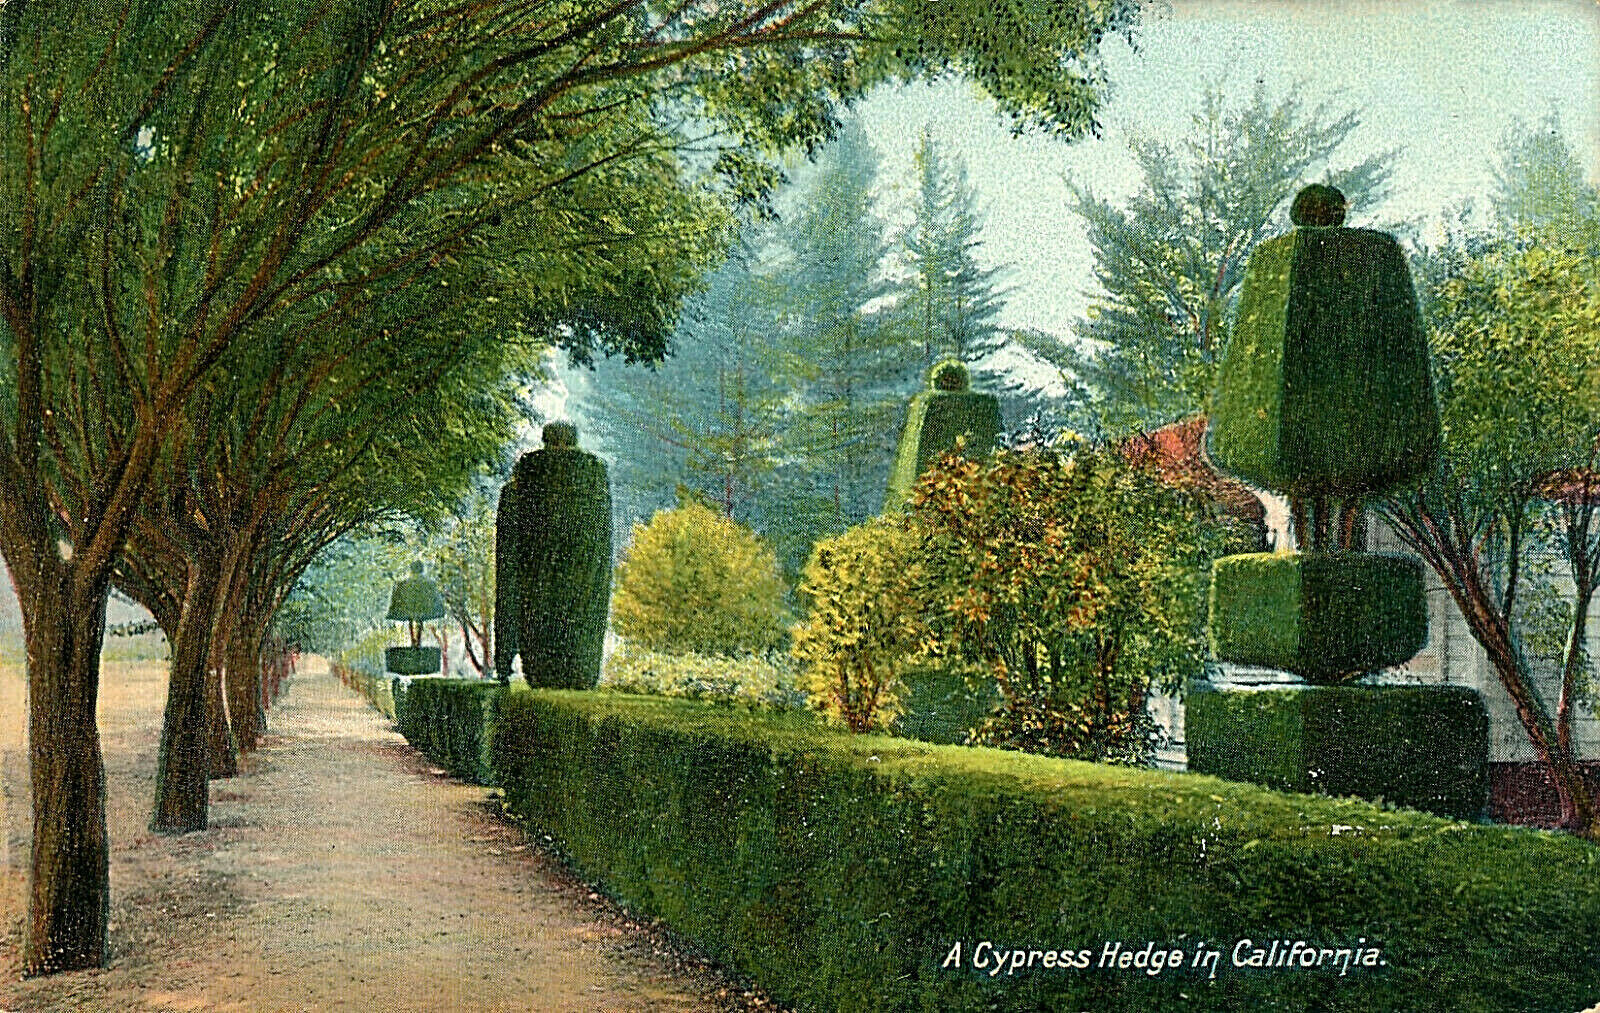 A CYPRESS HEDGE IN CALIFORNIA. CA. SCULPTED HEDGES. M. RIEDER(GERMANY) CA 1907.